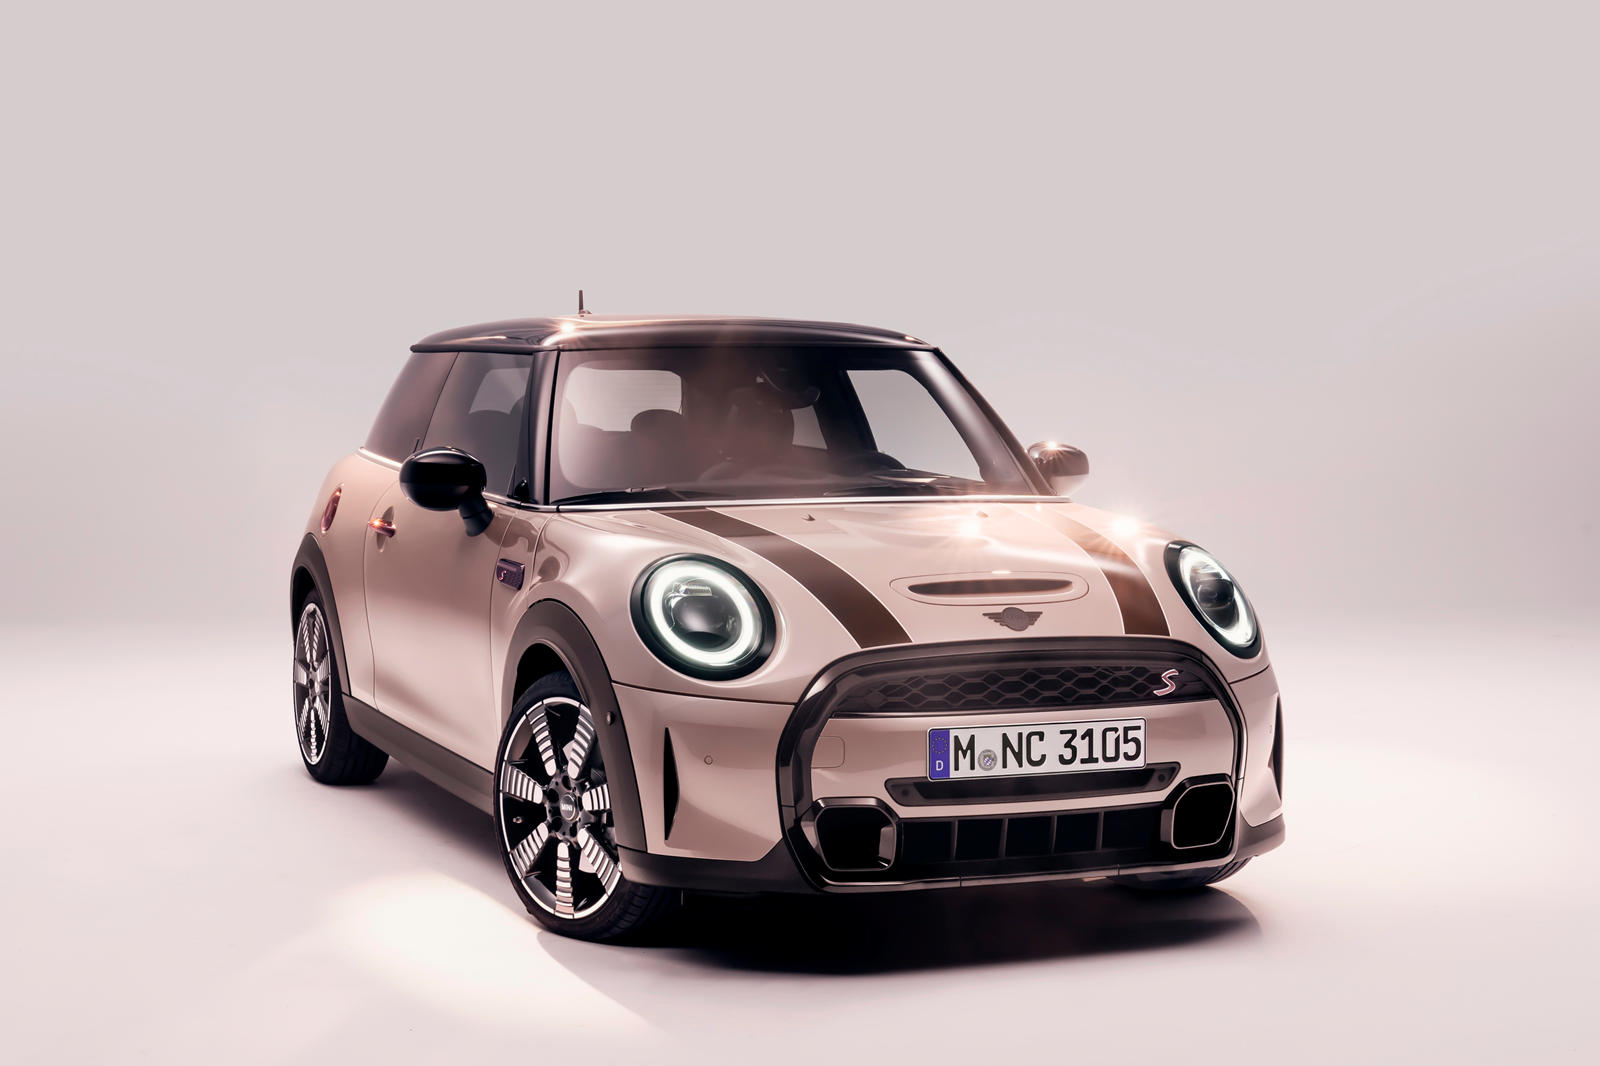 Mini updates its 2022 model lineup with revised looks and better tech ...